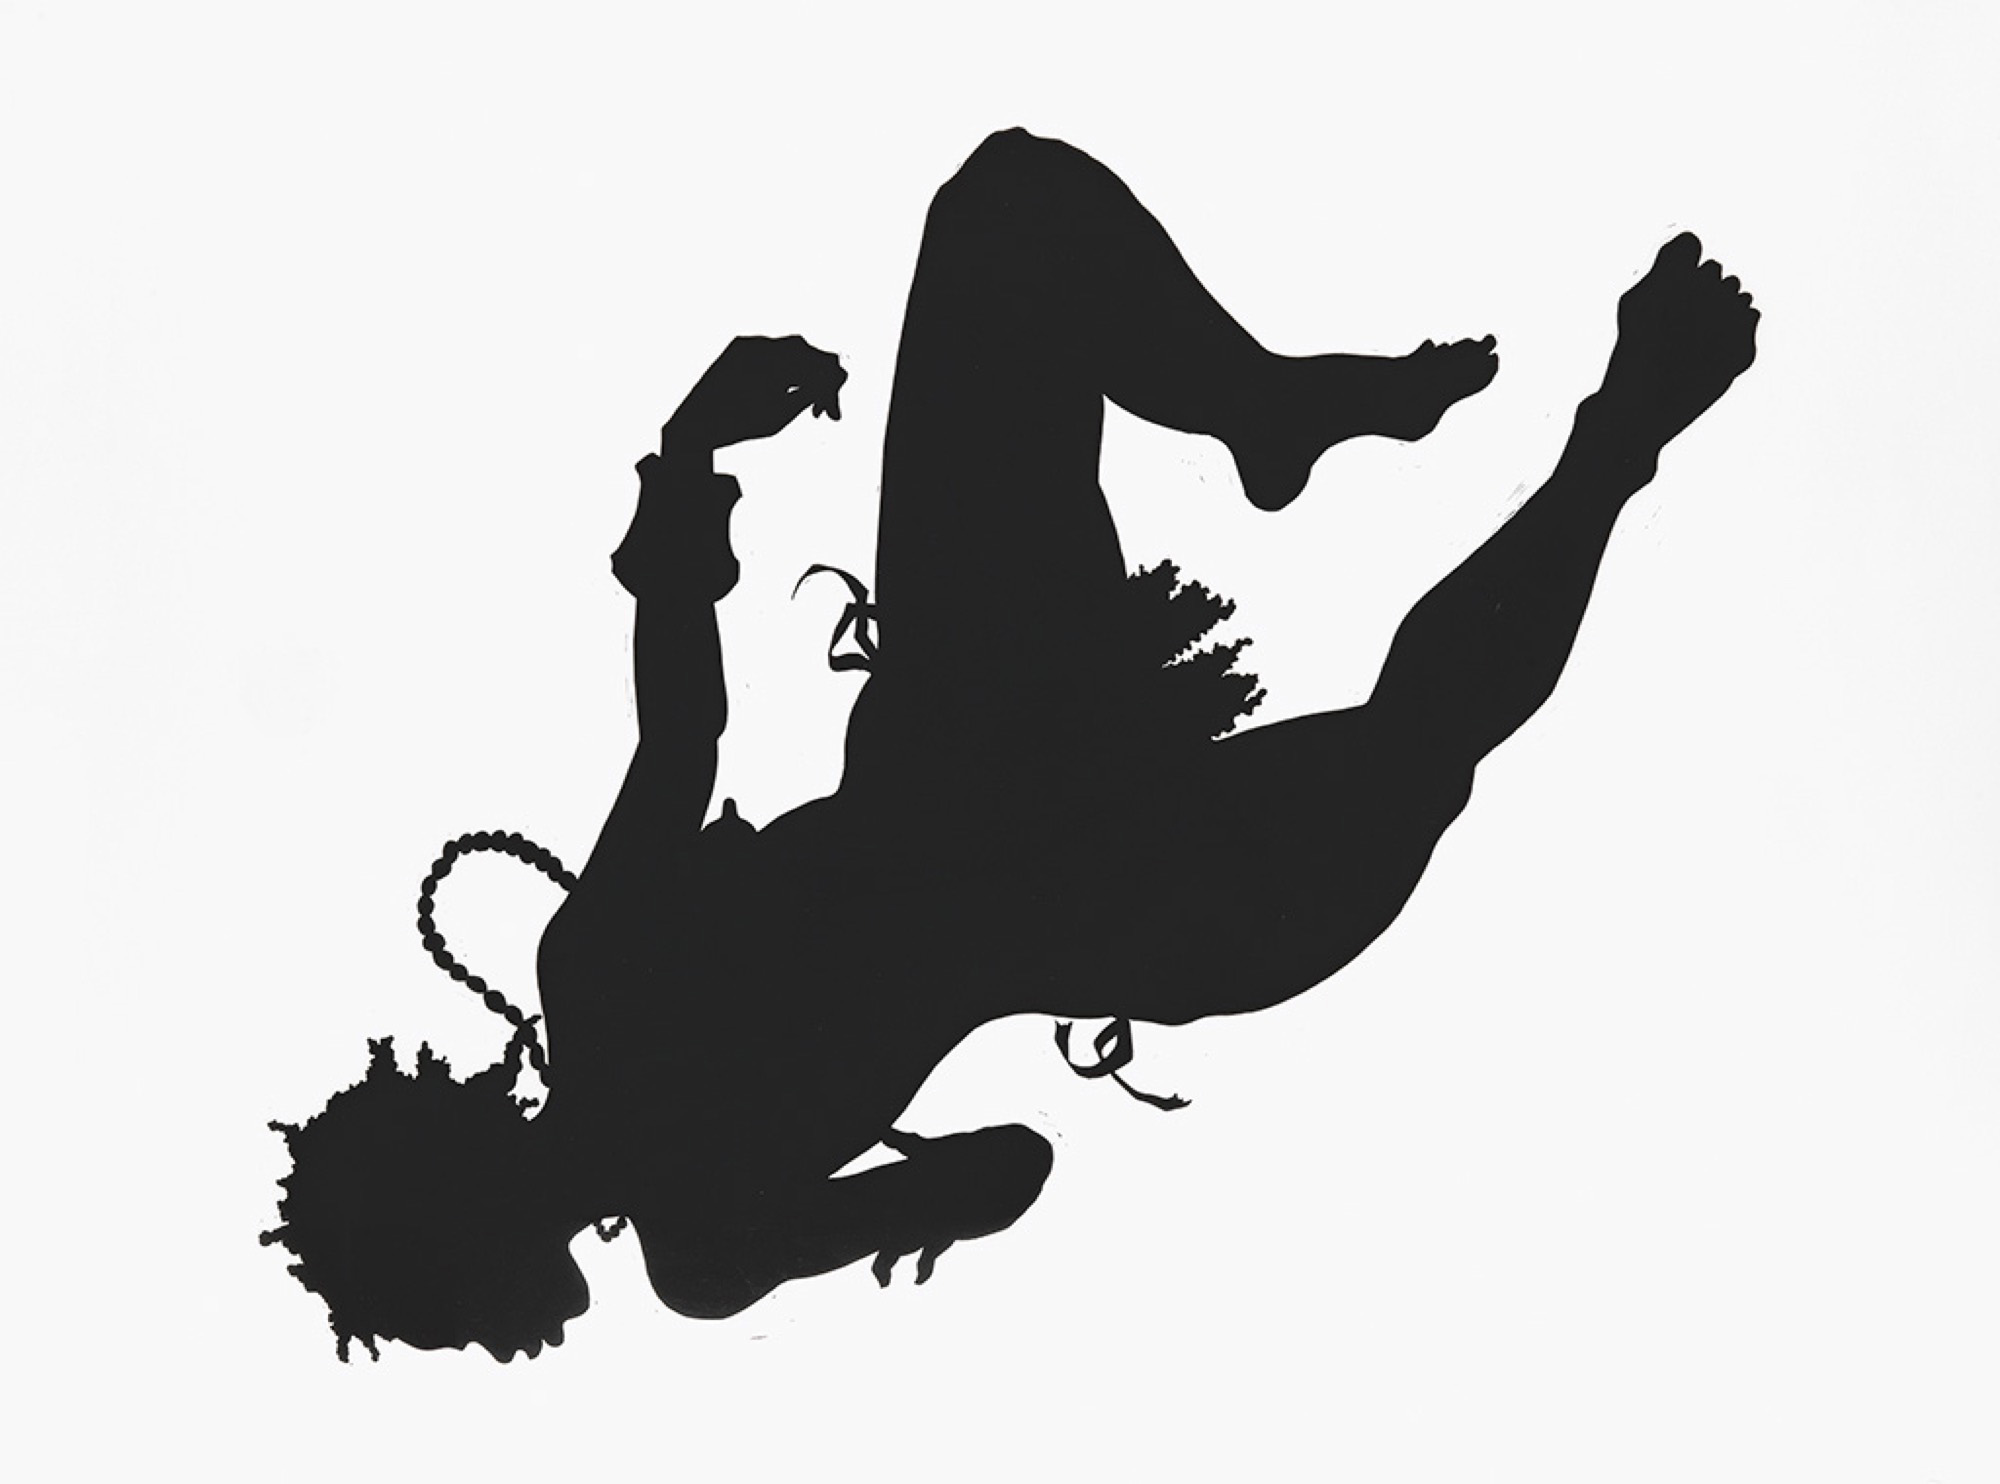 Linoleum cut image of a silhouetted woman of African descent free falling upside down while wearing a necklace, cuff bracelet, and what appears to be a loin cloth or pubic hair